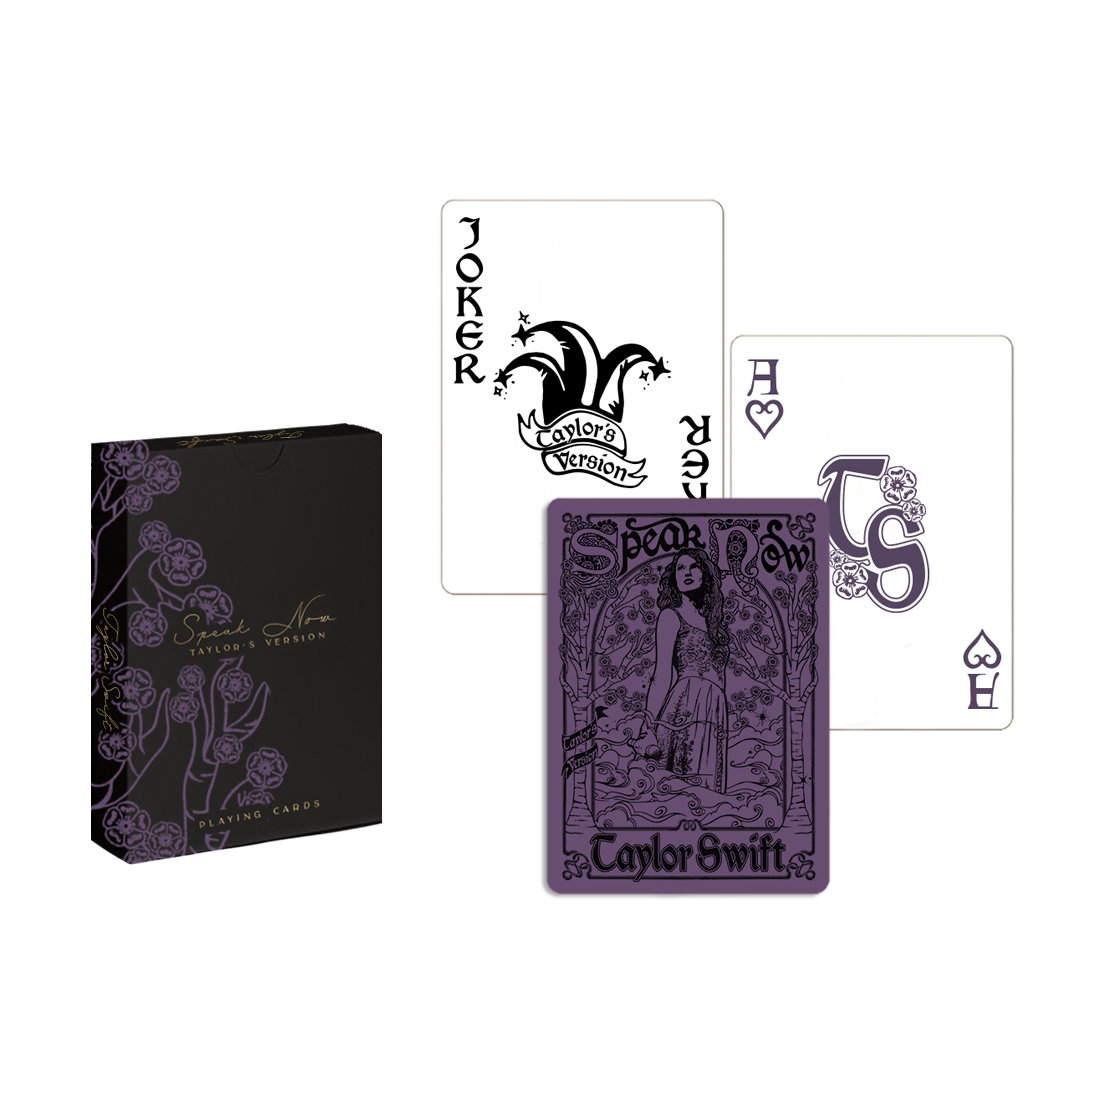 Speak Now (Taylor's Version) Playing Cards